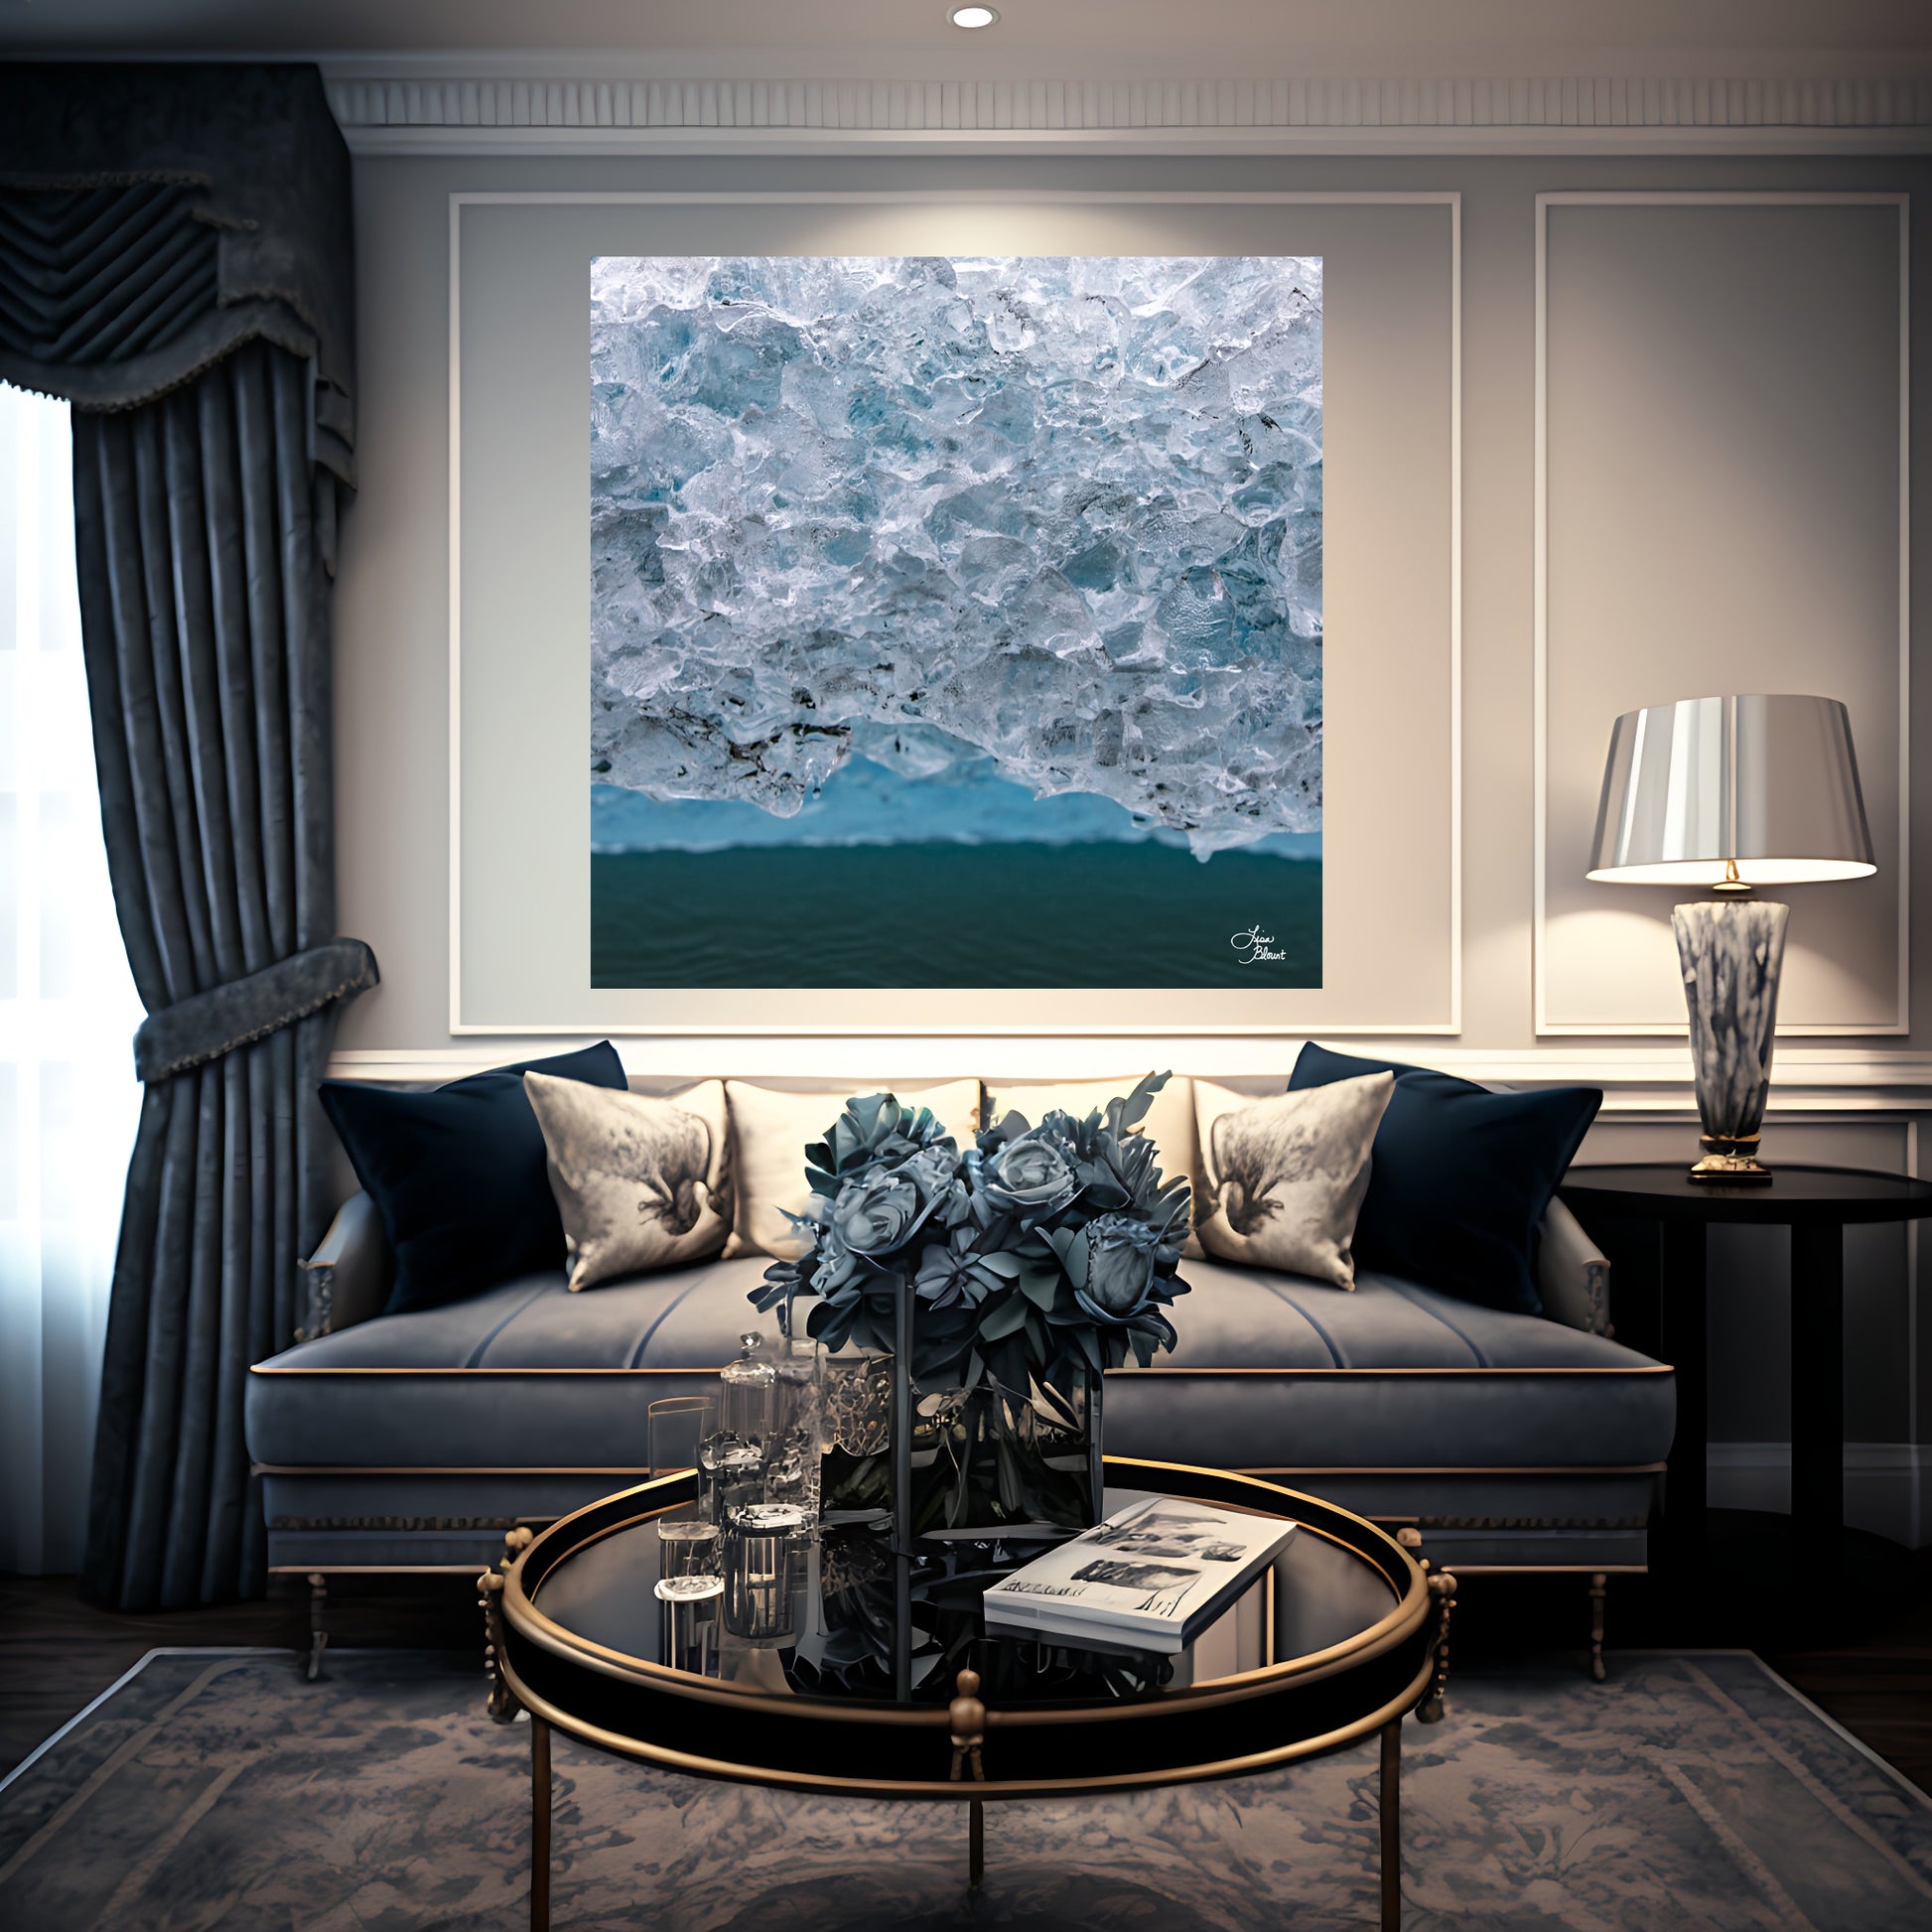 Beautiful home decor of velvet couch living room with light grey walls featuring blue teal ice art